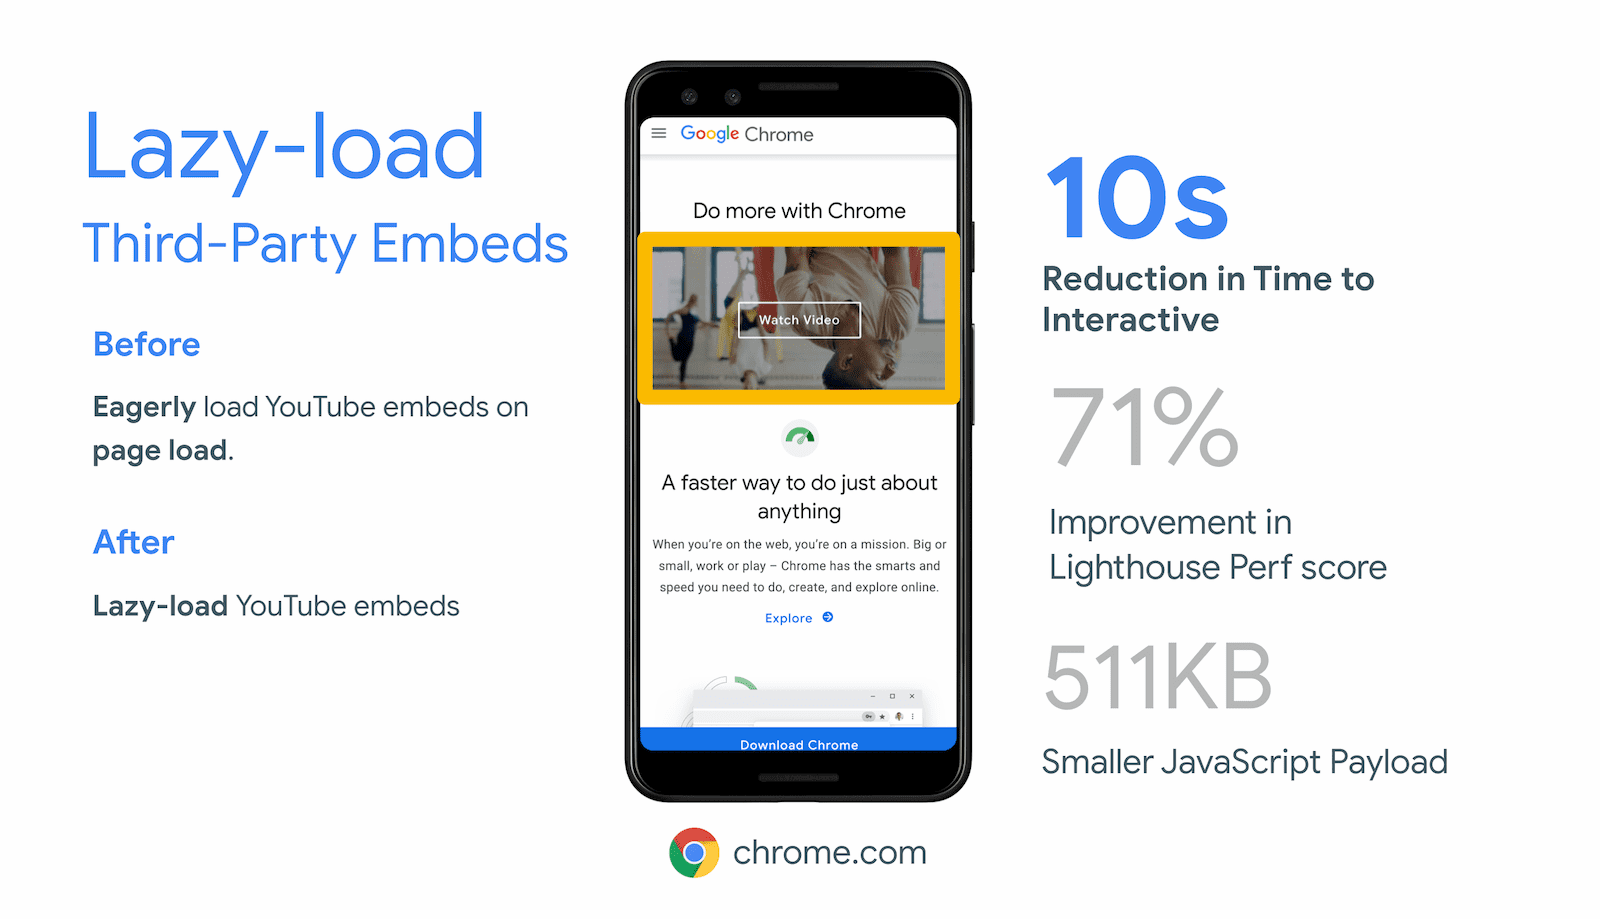 Chrome.com achieved a 10 second reduction in Time To Interactive by lazy-loading offscreen iframes for their YouTube video embed